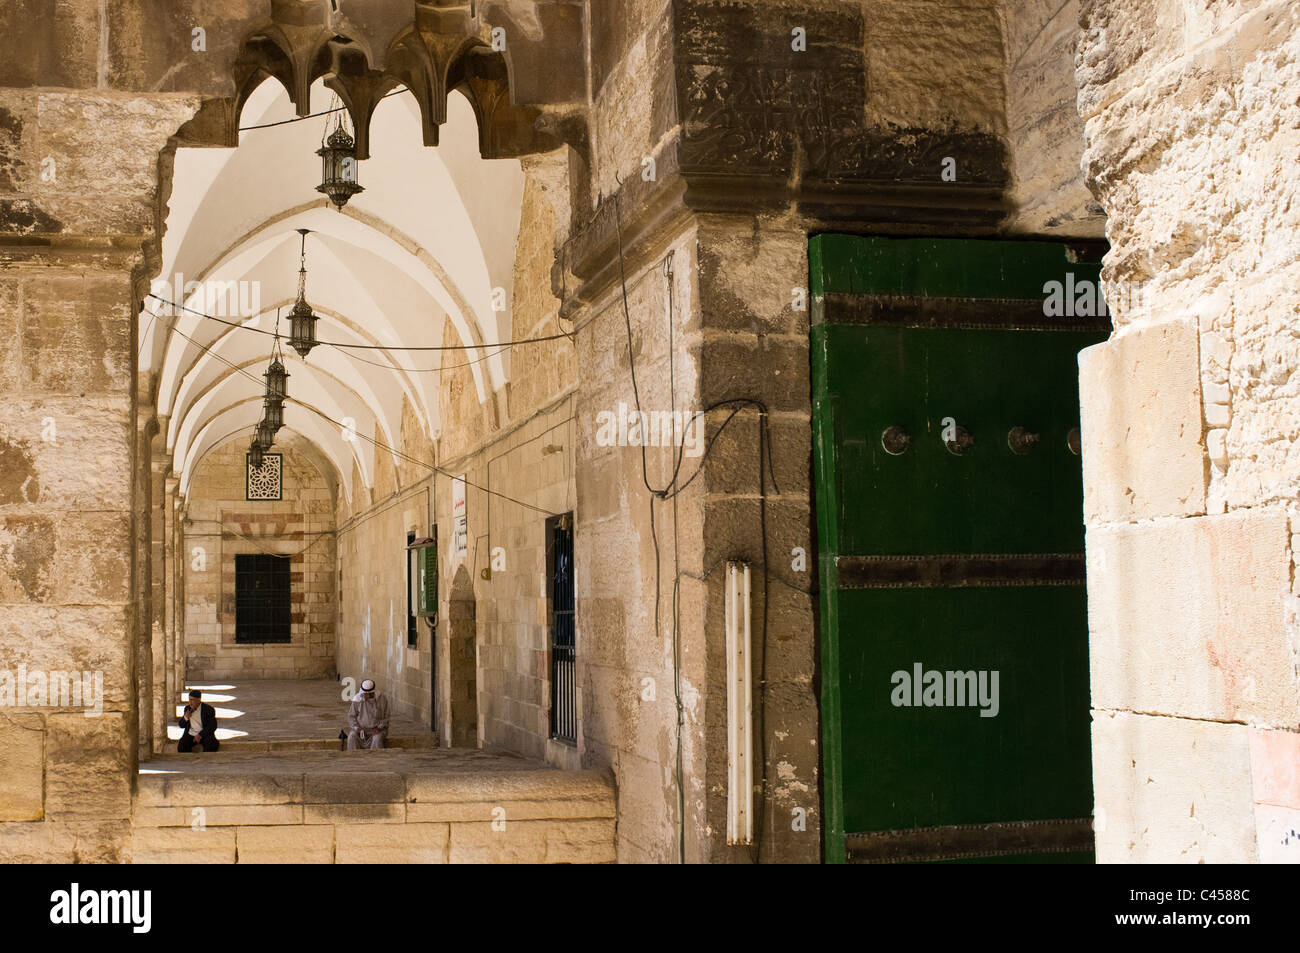 The Gate of the Cotton Merchants at the Al-Aqsa Mosque compound, Temple Mount. Jerusalem, Israel. 2 June 2011. Stock Photo